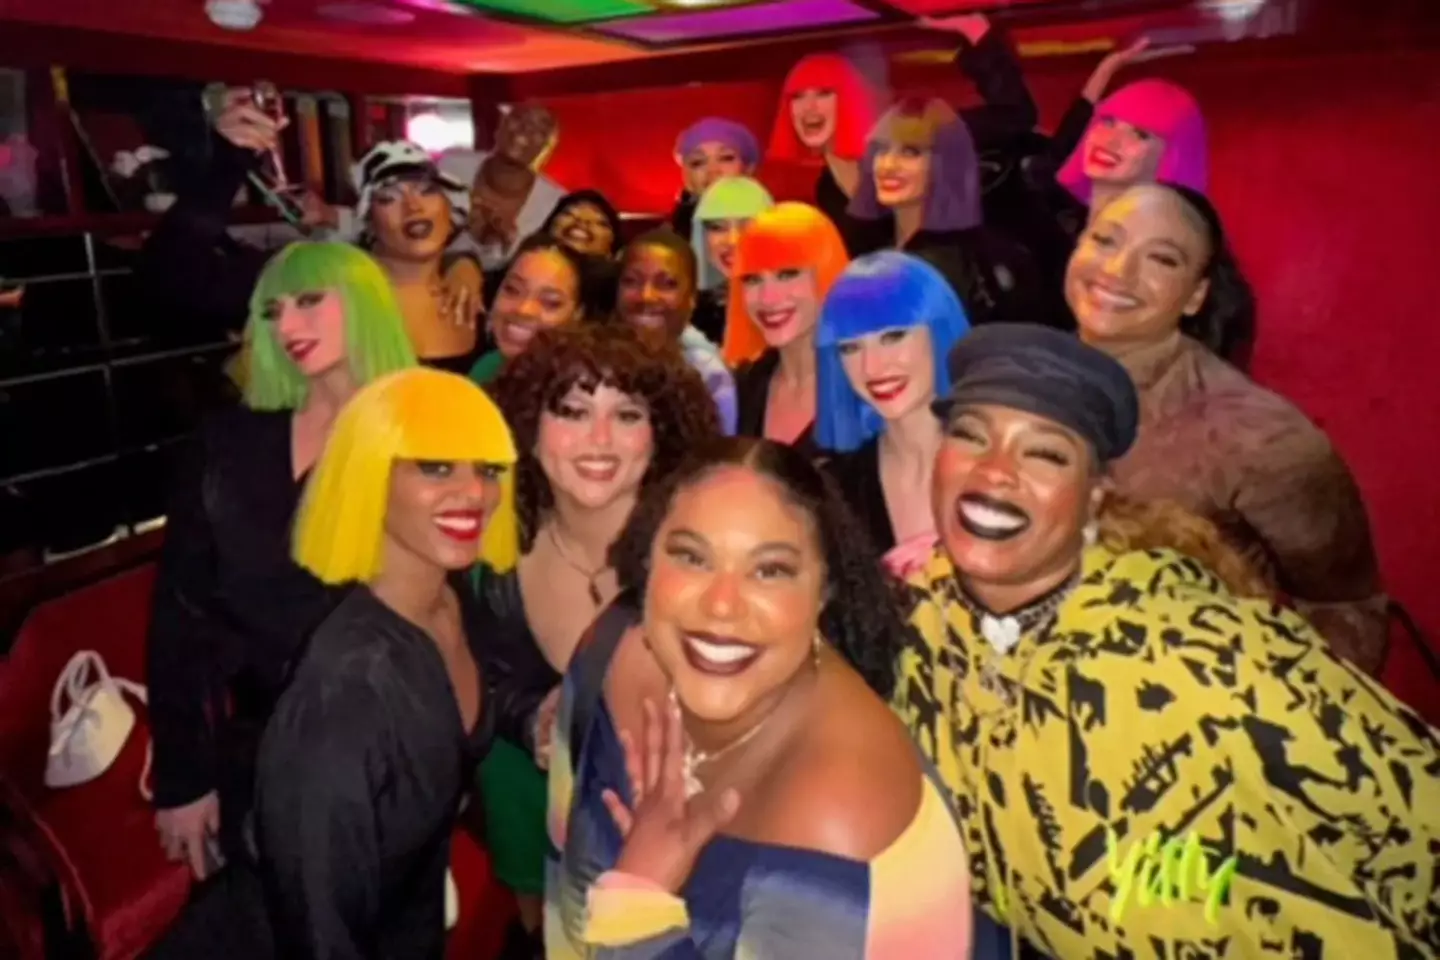 Lizzo's lawyer says this picture shows two of the dancers that are suing her 'enjoying themselves'.